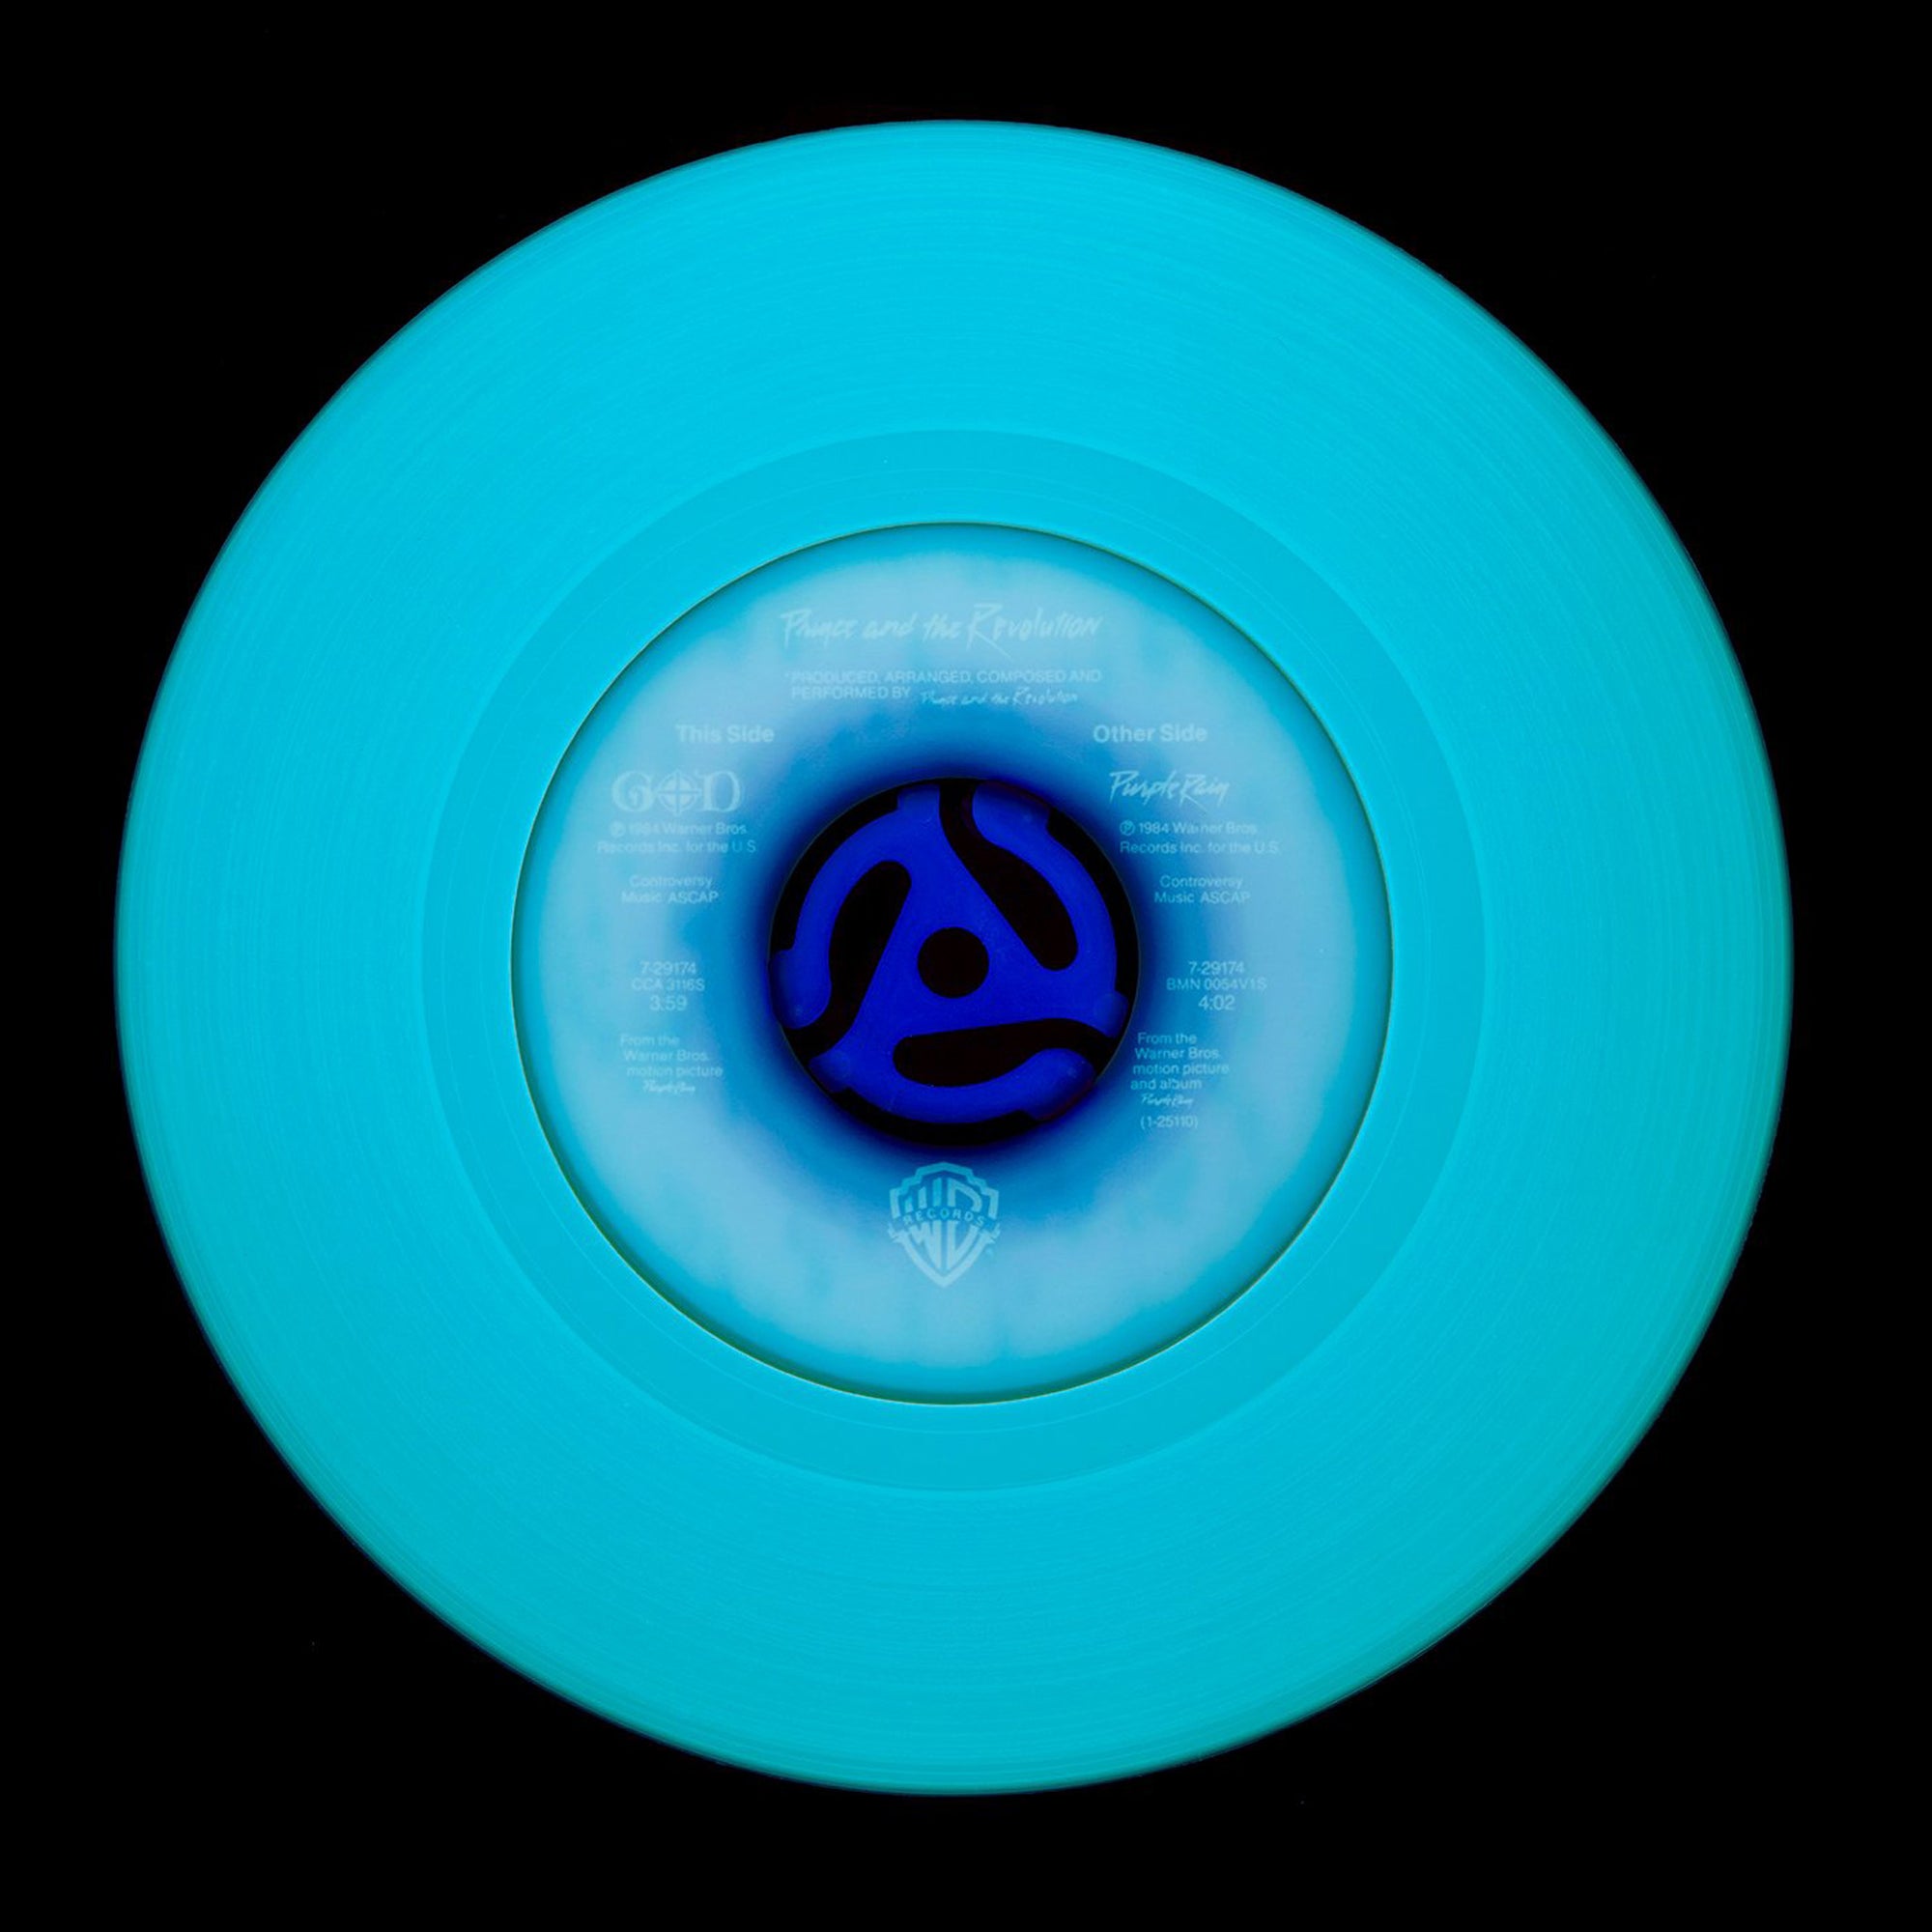 Vinyl Collection 'Other Side' (Blue), 2020. Acclaimed contemporary photographers, Richard Heeps and Natasha Heidler have collaborated to make this beautifully mesmerising collection. A celebration of the vinyl record and analogue technology, which reflects the artists practice within photography.